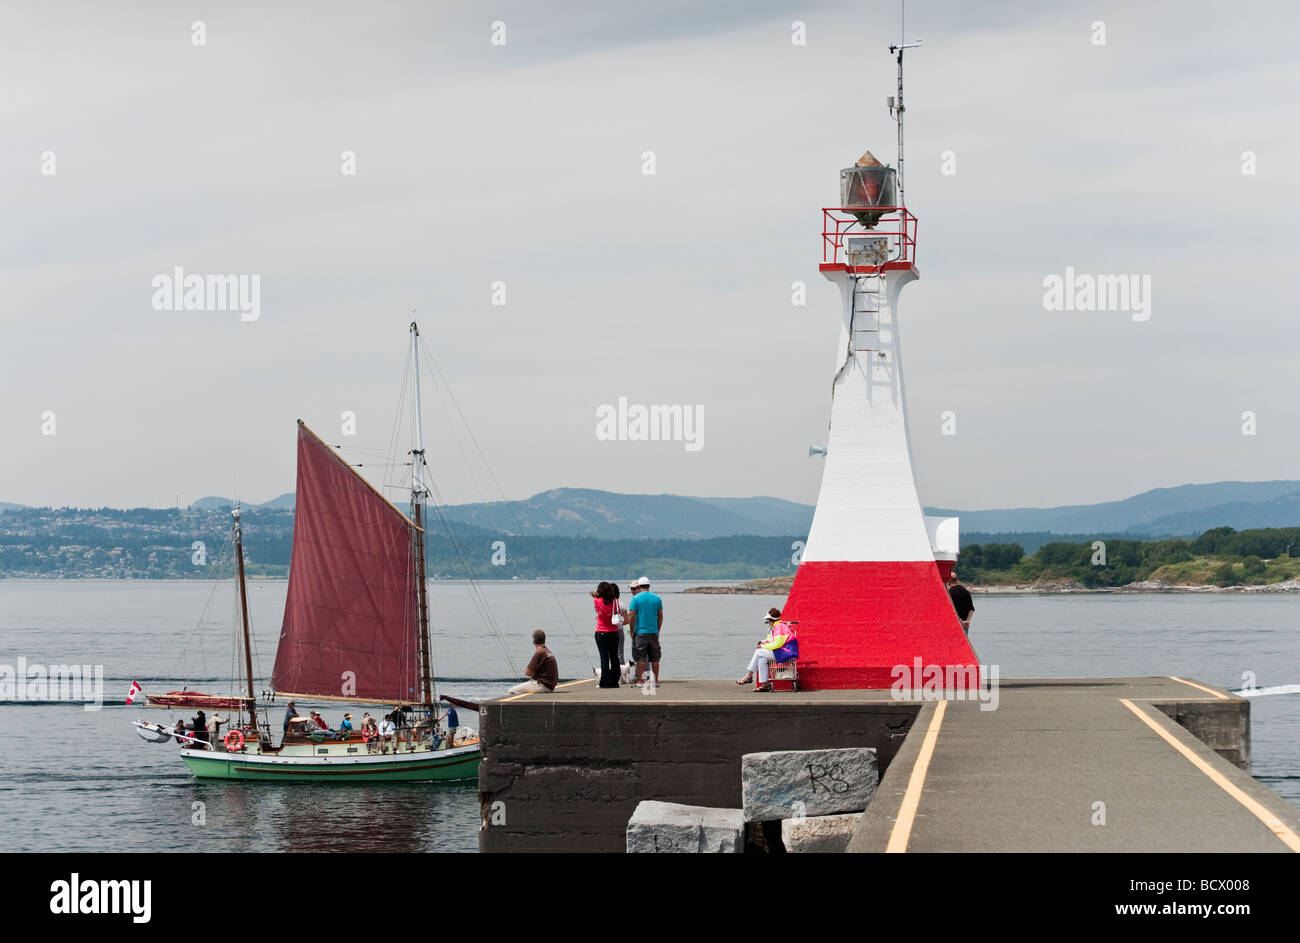 The tall ship 'Thane' sails past the lighthouse guarding Ogden Point on the way to the inner harbor in Victoria, BC. Stock Photo